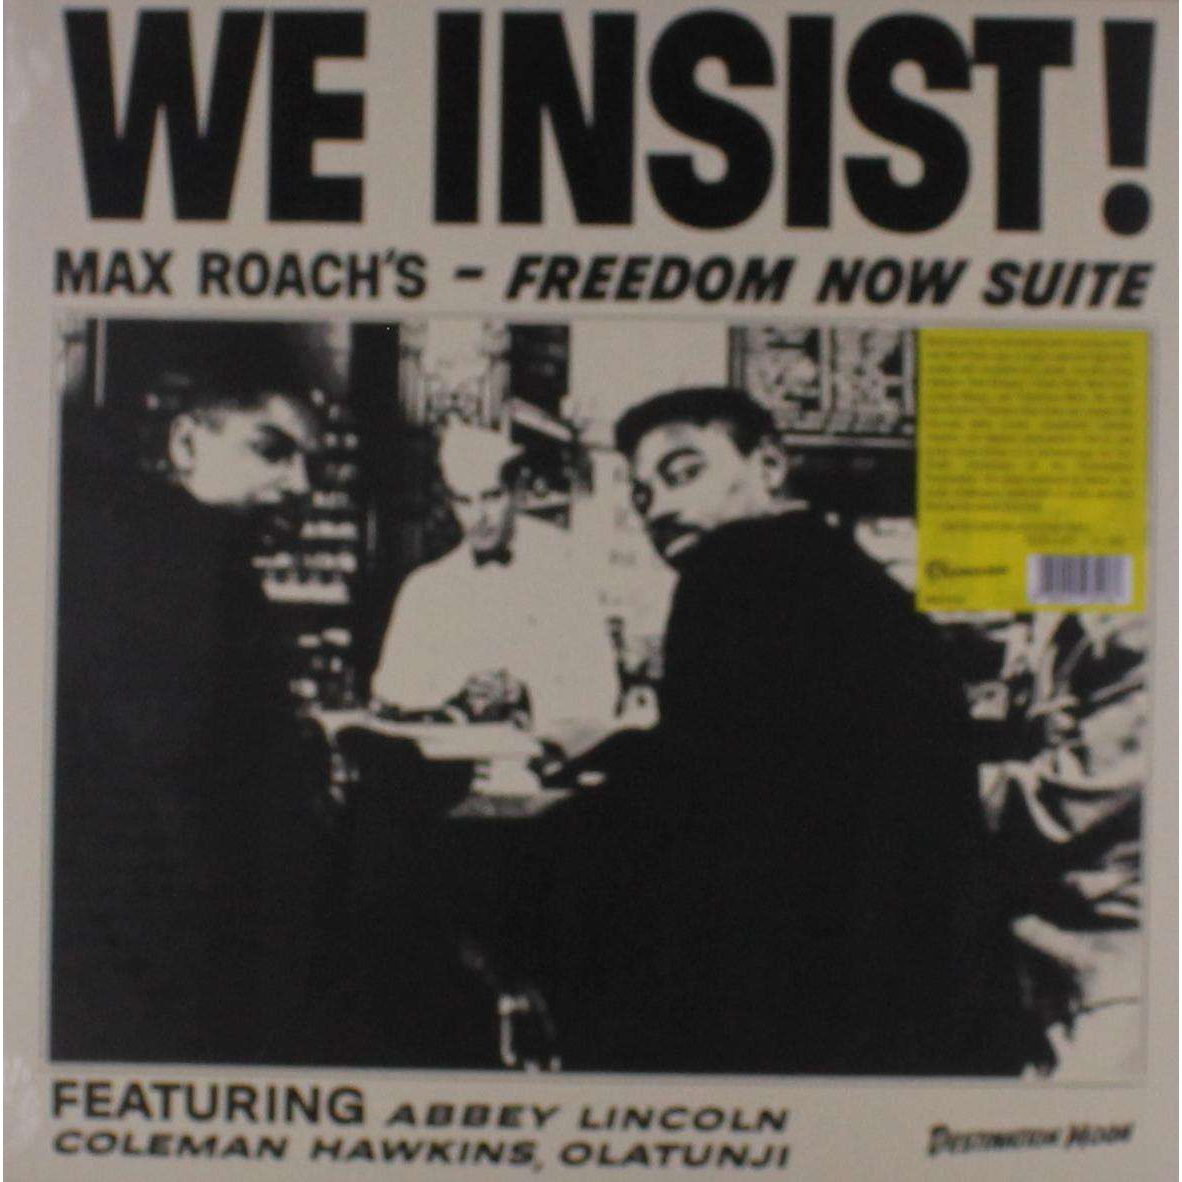 (CLEAR VINYL) (NUMBERED) WE INSIST! MAX ROACH'S FREEDOM NOW SUITE